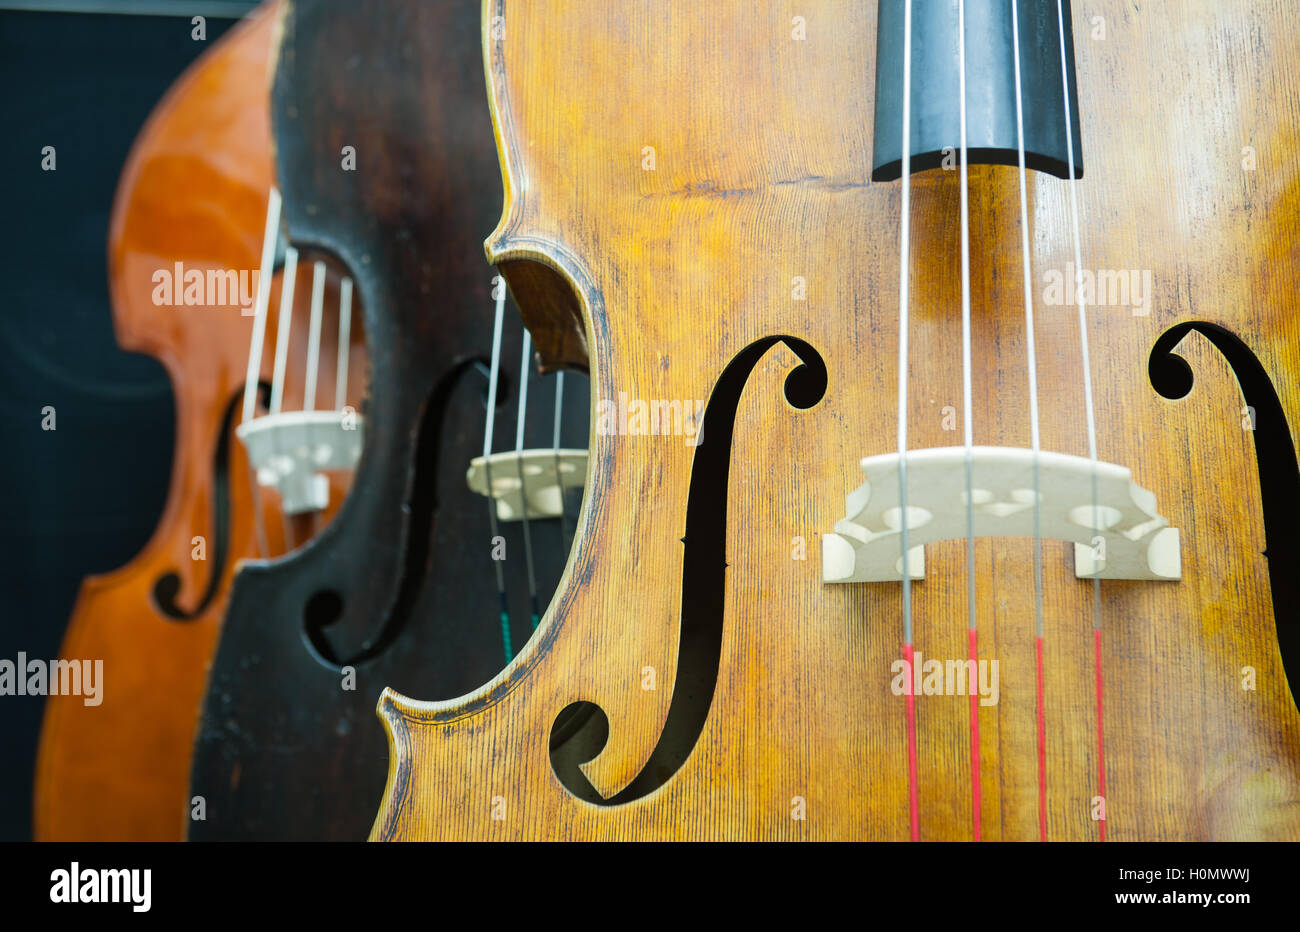 Three double bass detail in a row selective focuse on light brown, black and dark brown one Stock Photo